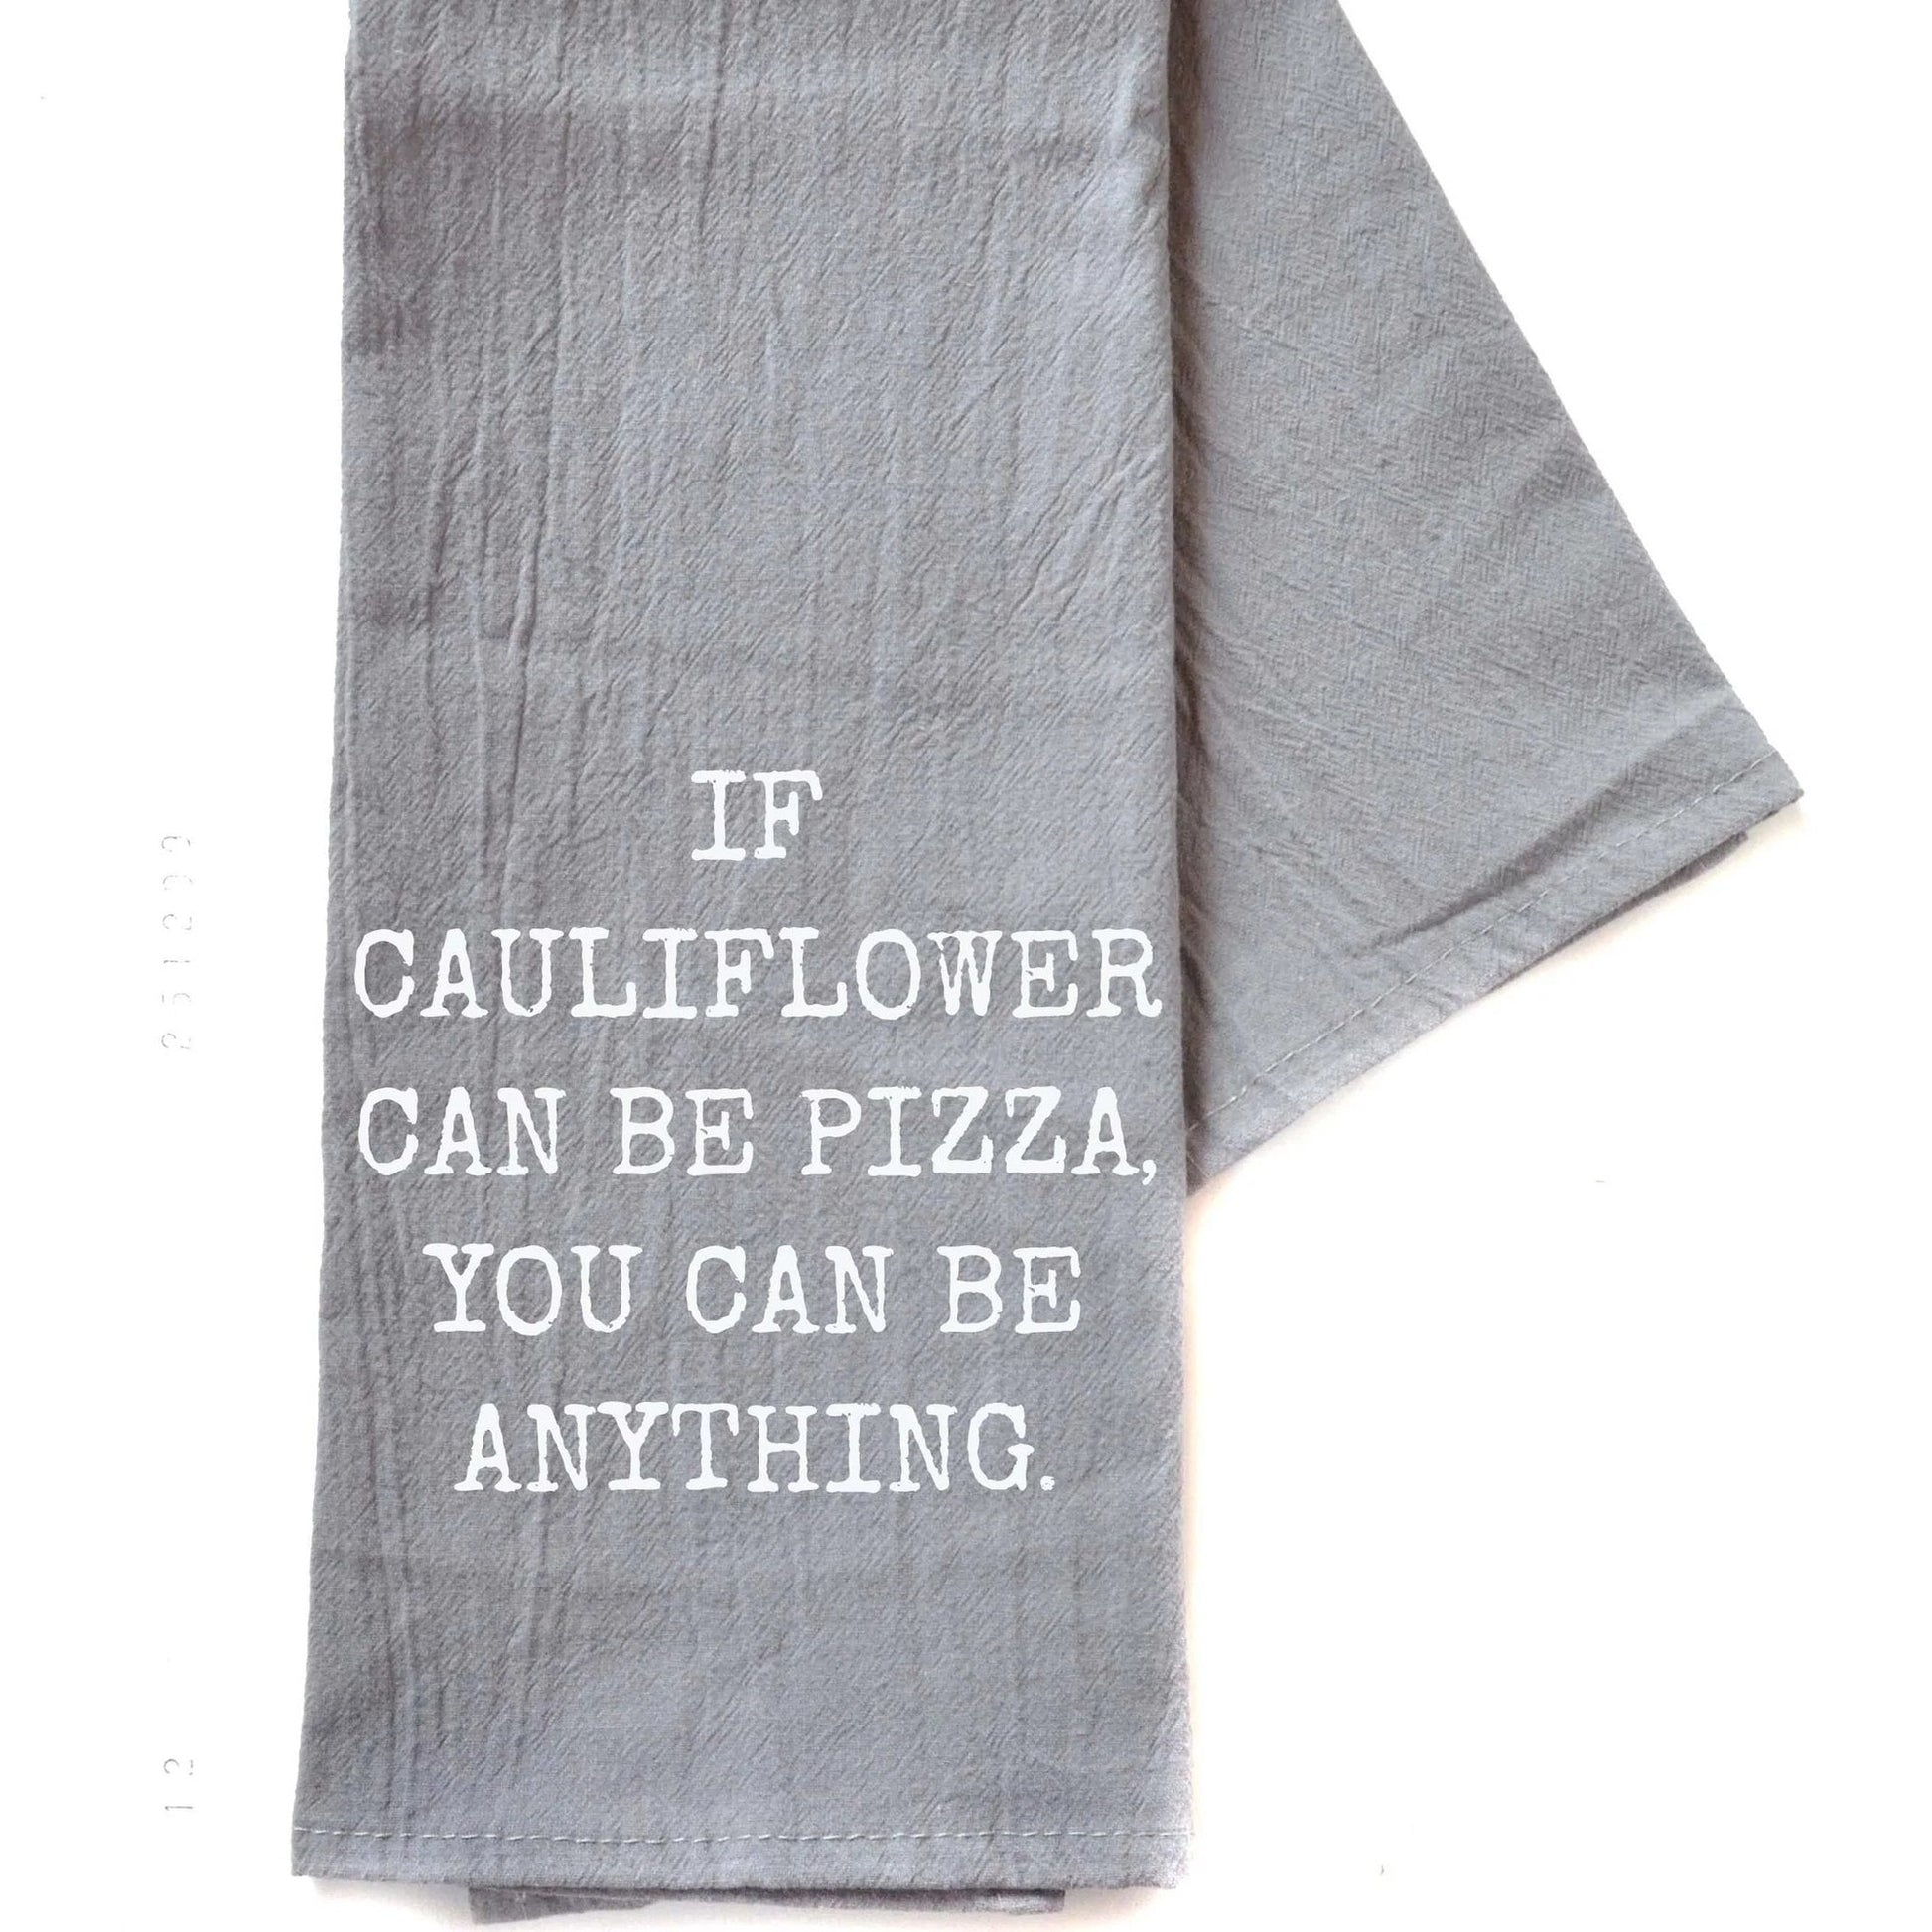 If Cauliflower Can Be Pizza Cotton Hand Towel | Gray | 16" x 24"